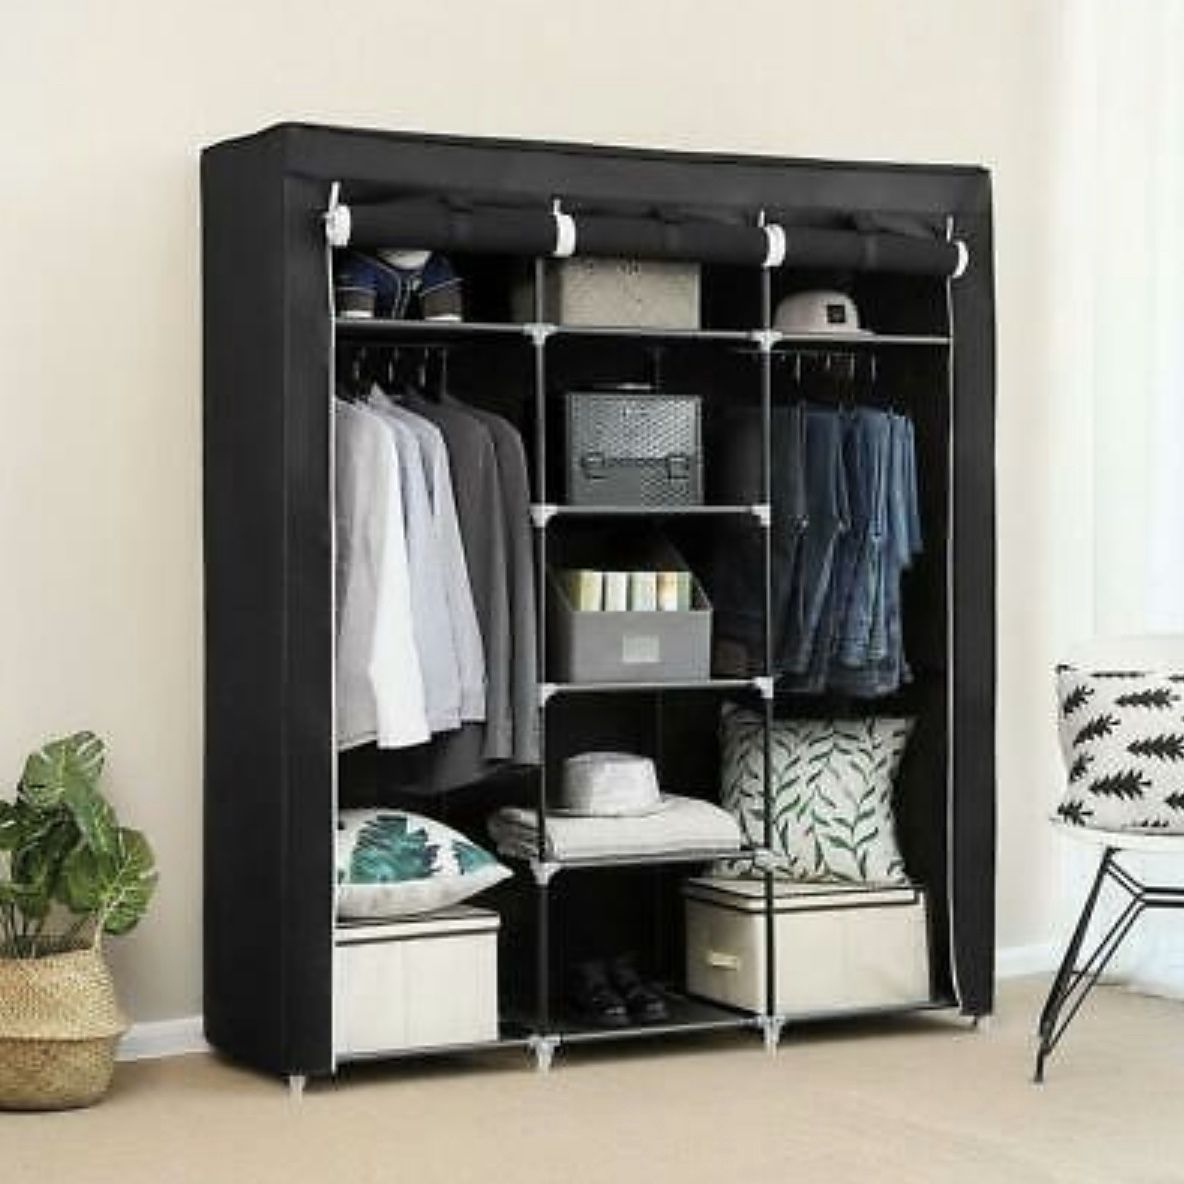 New 69" Portable Closet Wardrobe Clothes Shoes Storage Space Organizer Multiple Colors Available